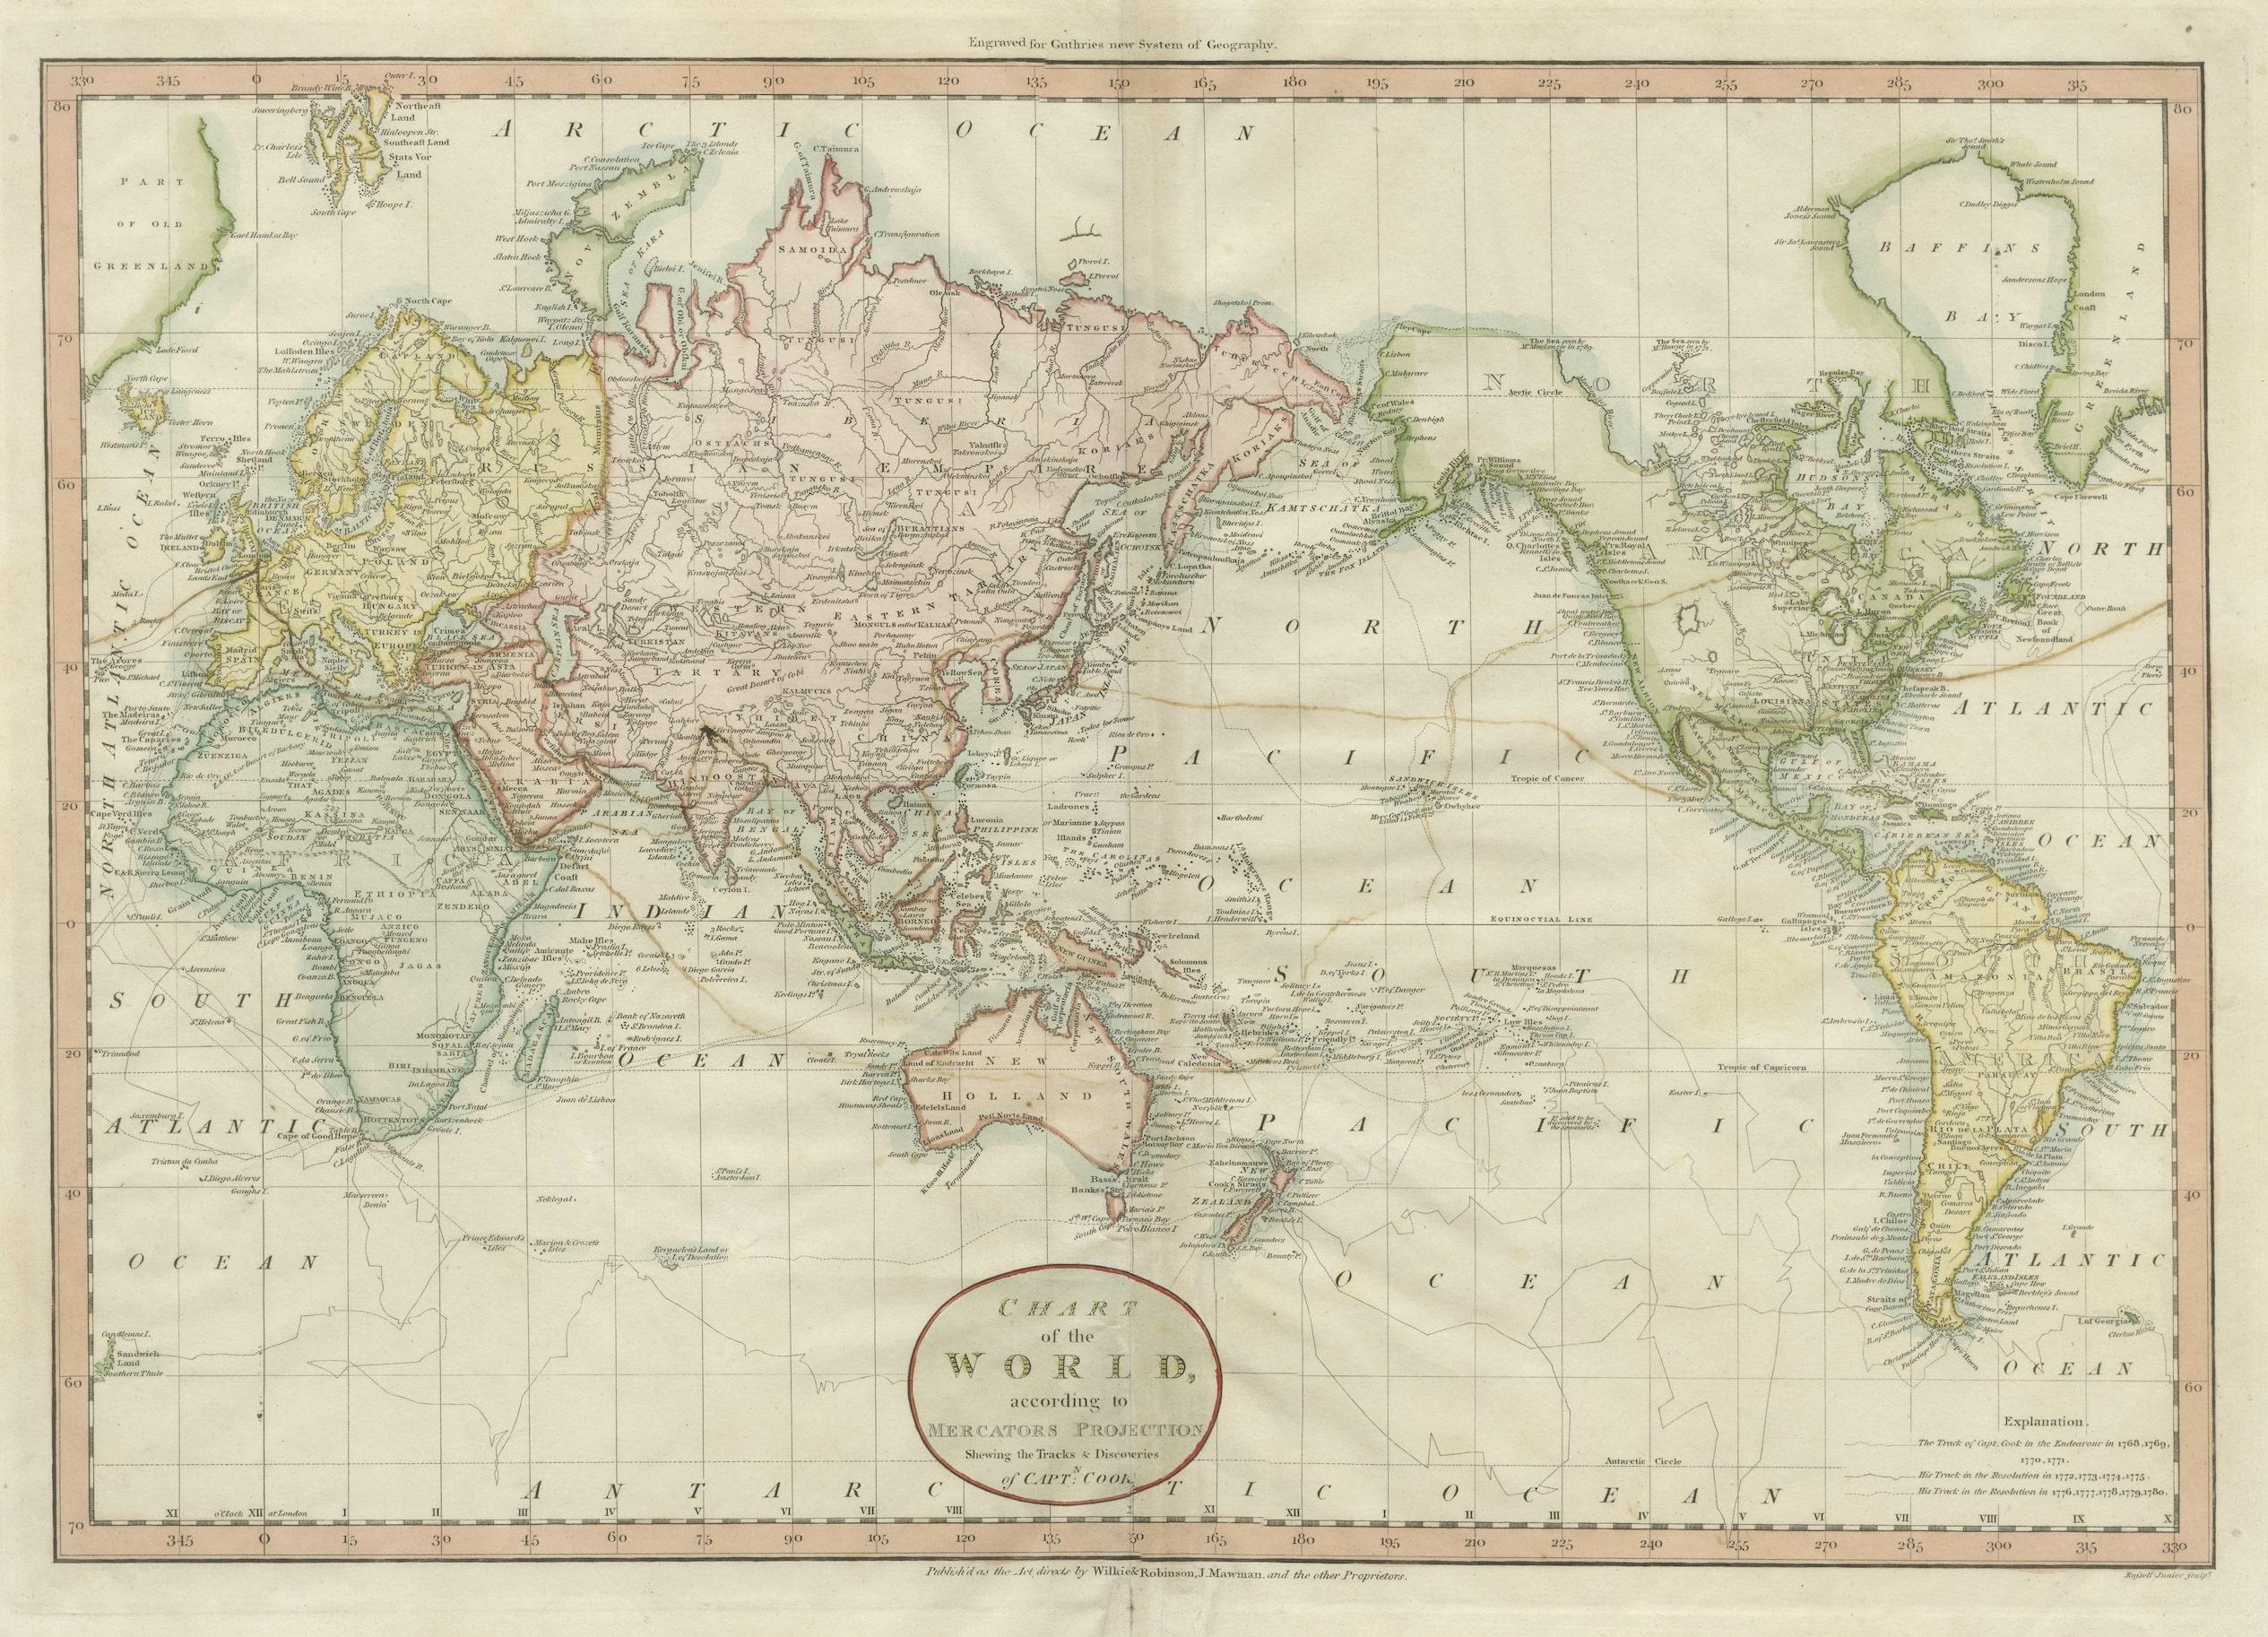 Antique map titled 'Chart of the World, according to Mercators Projection'. This world map shows the various discoveries of Captain James Cook during his 3 voyages between 1768 and 1780, and the English and French Explorers who followed immediately